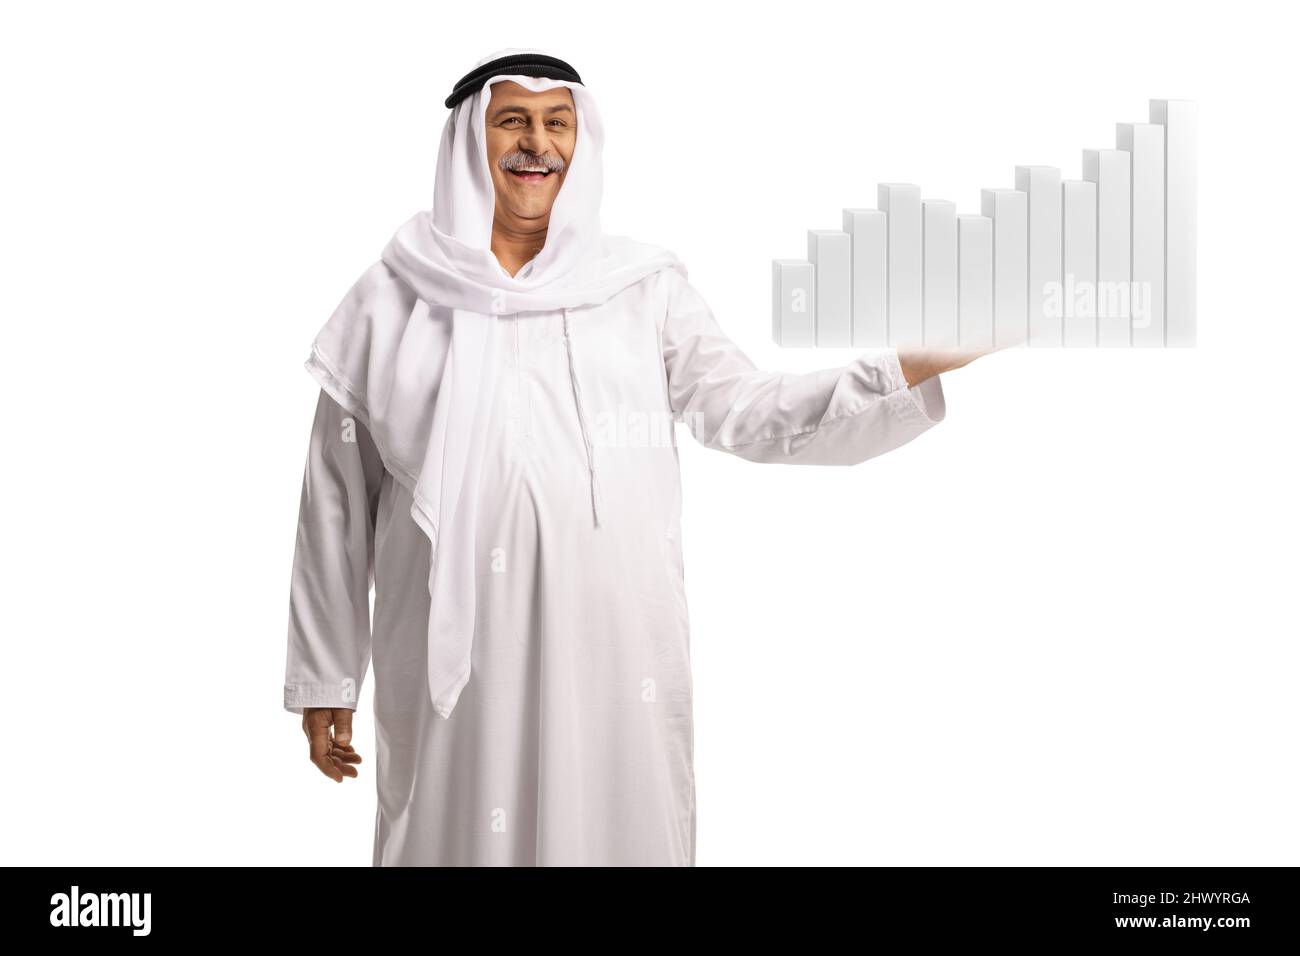 Mature muslim man in dishdasha holding a bar chart diagram isolated on white background Stock Photo